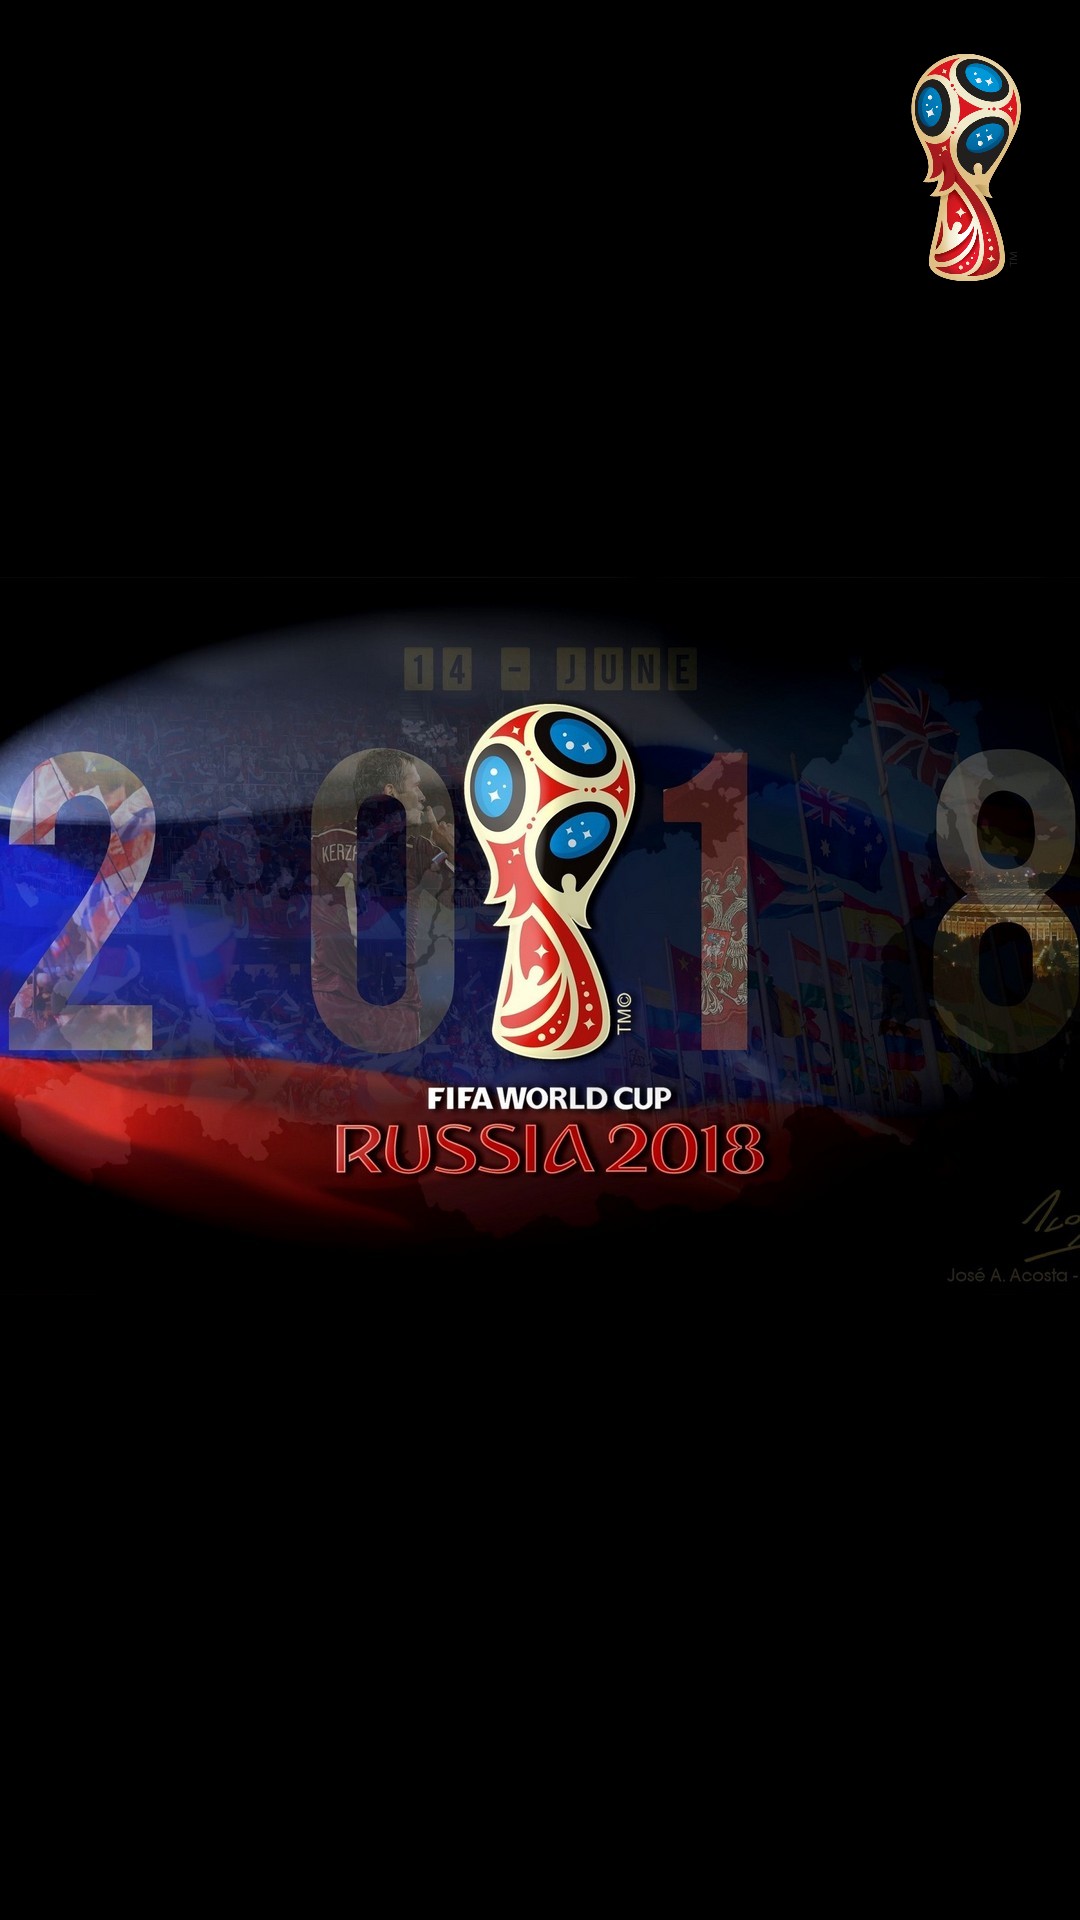 FIFA World Cup Wallpaper iPhone HD with resolution 1080x1920 pixel. You can make this wallpaper for your Mac or Windows Desktop Background, iPhone, Android or Tablet and another Smartphone device